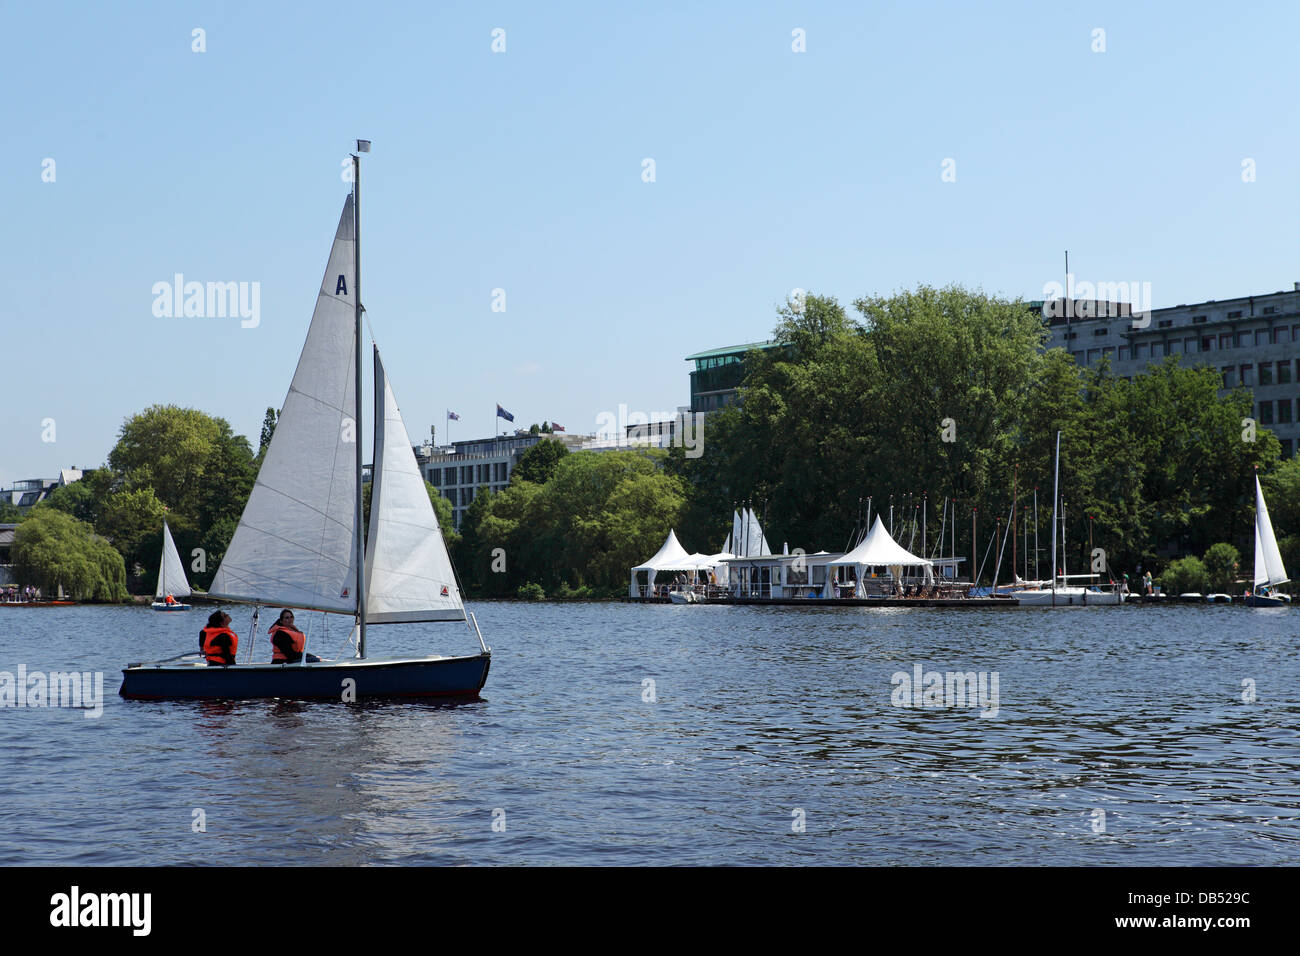 Sailing on the Outer Alster lake (Aussenalster) in Hamburg, Germany. Stock Photo